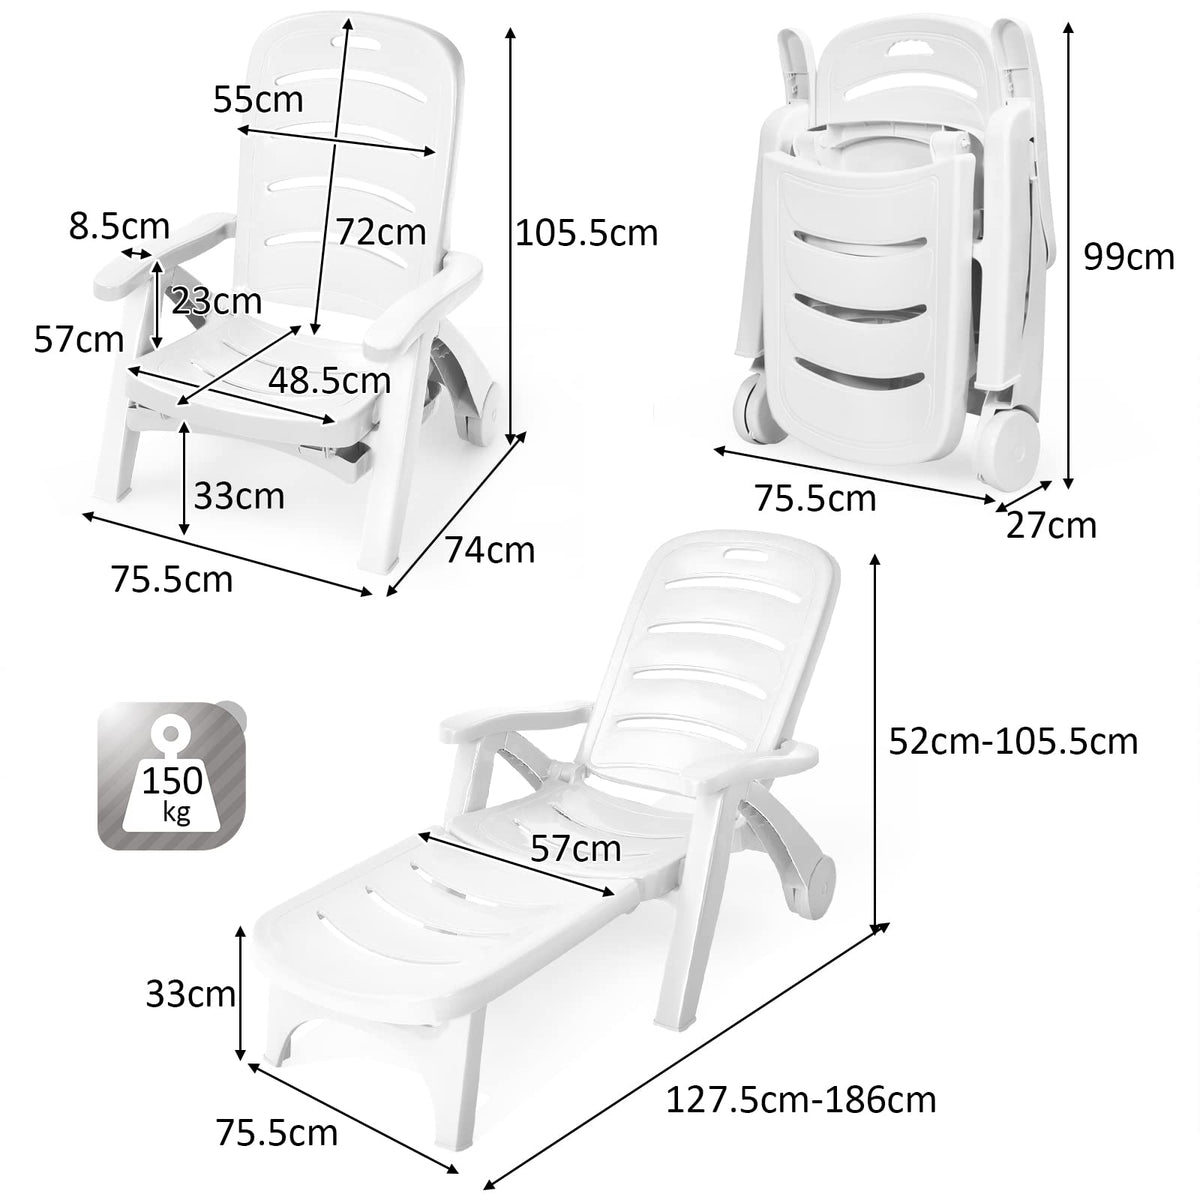 Giantex Folding Camping Lounge Chair, Portable Rolling Recliner w/Wheels, 5 Adjustable Positions, White